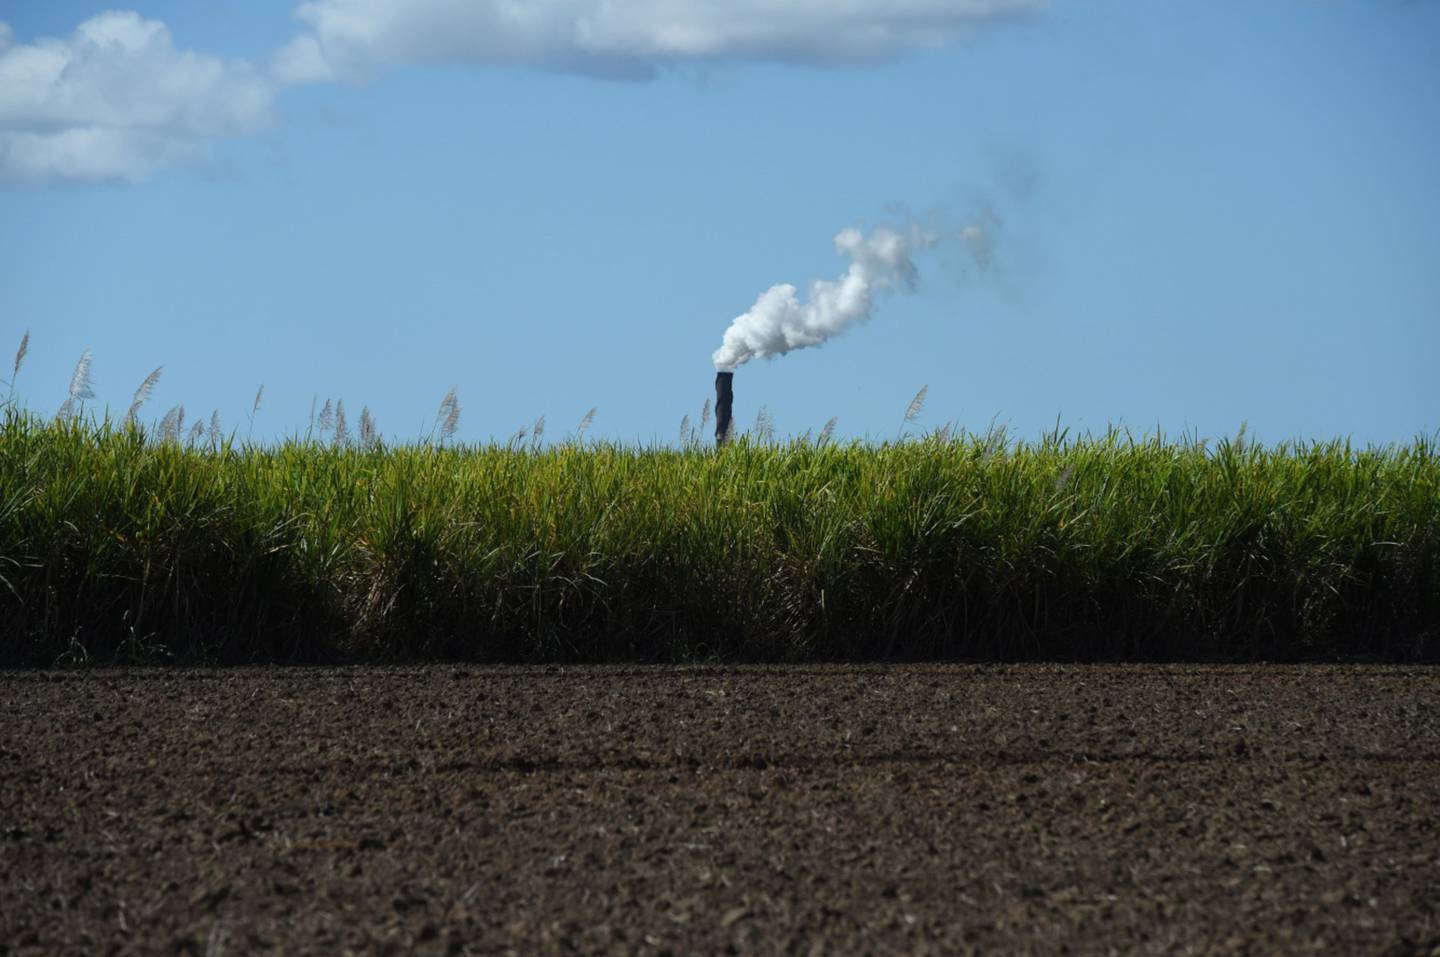 Brazil's sugarcane growers have been accused of shaping the legislation and reaping the financial rewards while doing little to curb global warming